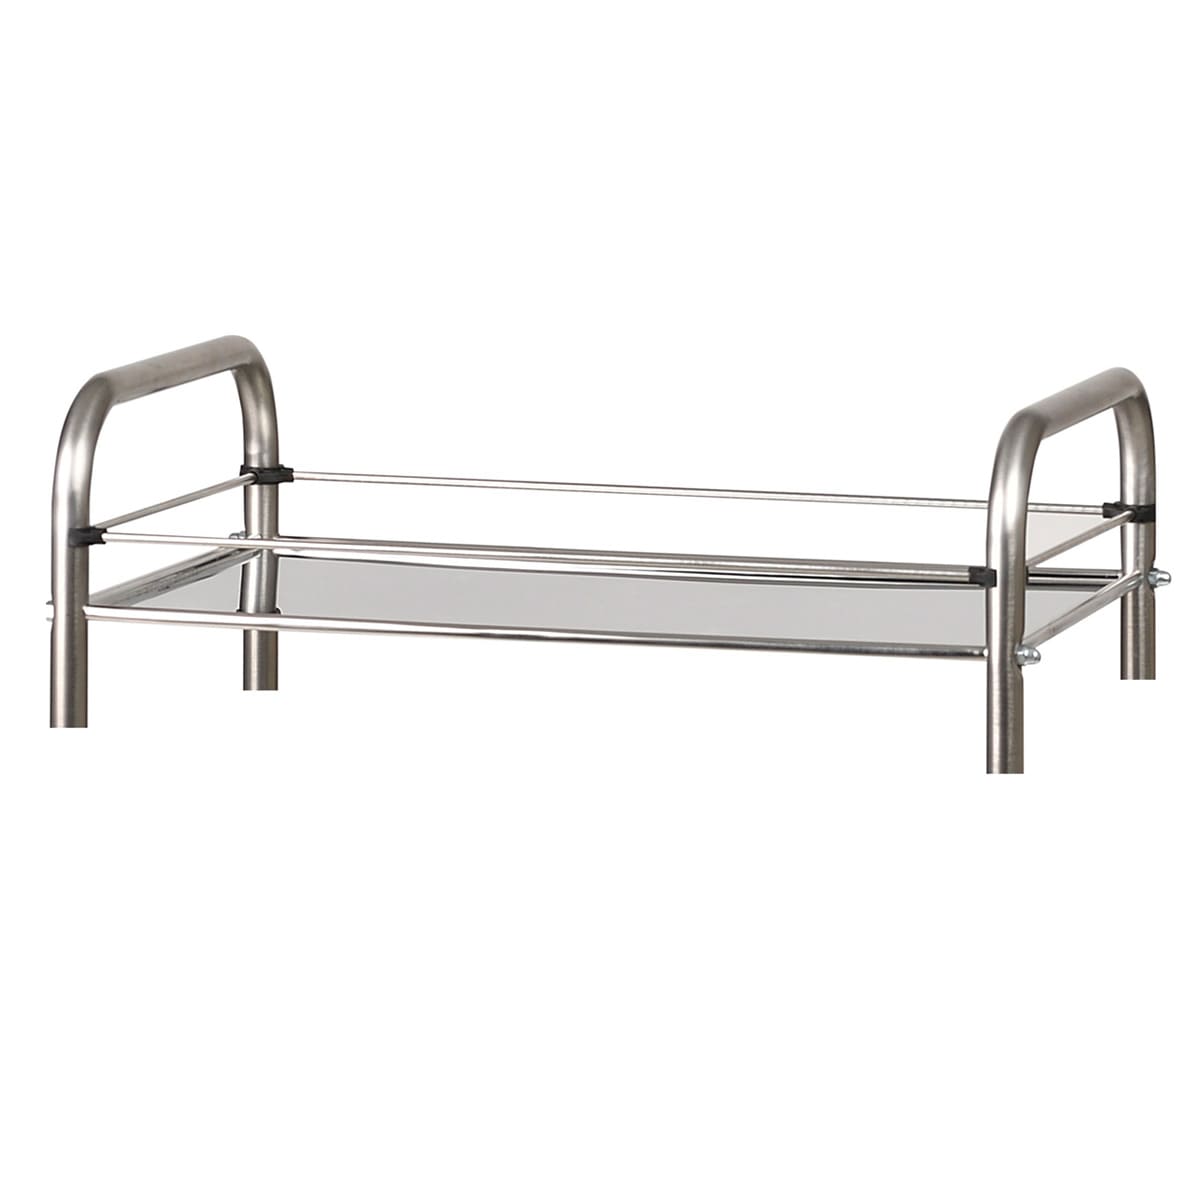 Set of 4 stainless steel guard rails for tray 70x50cm